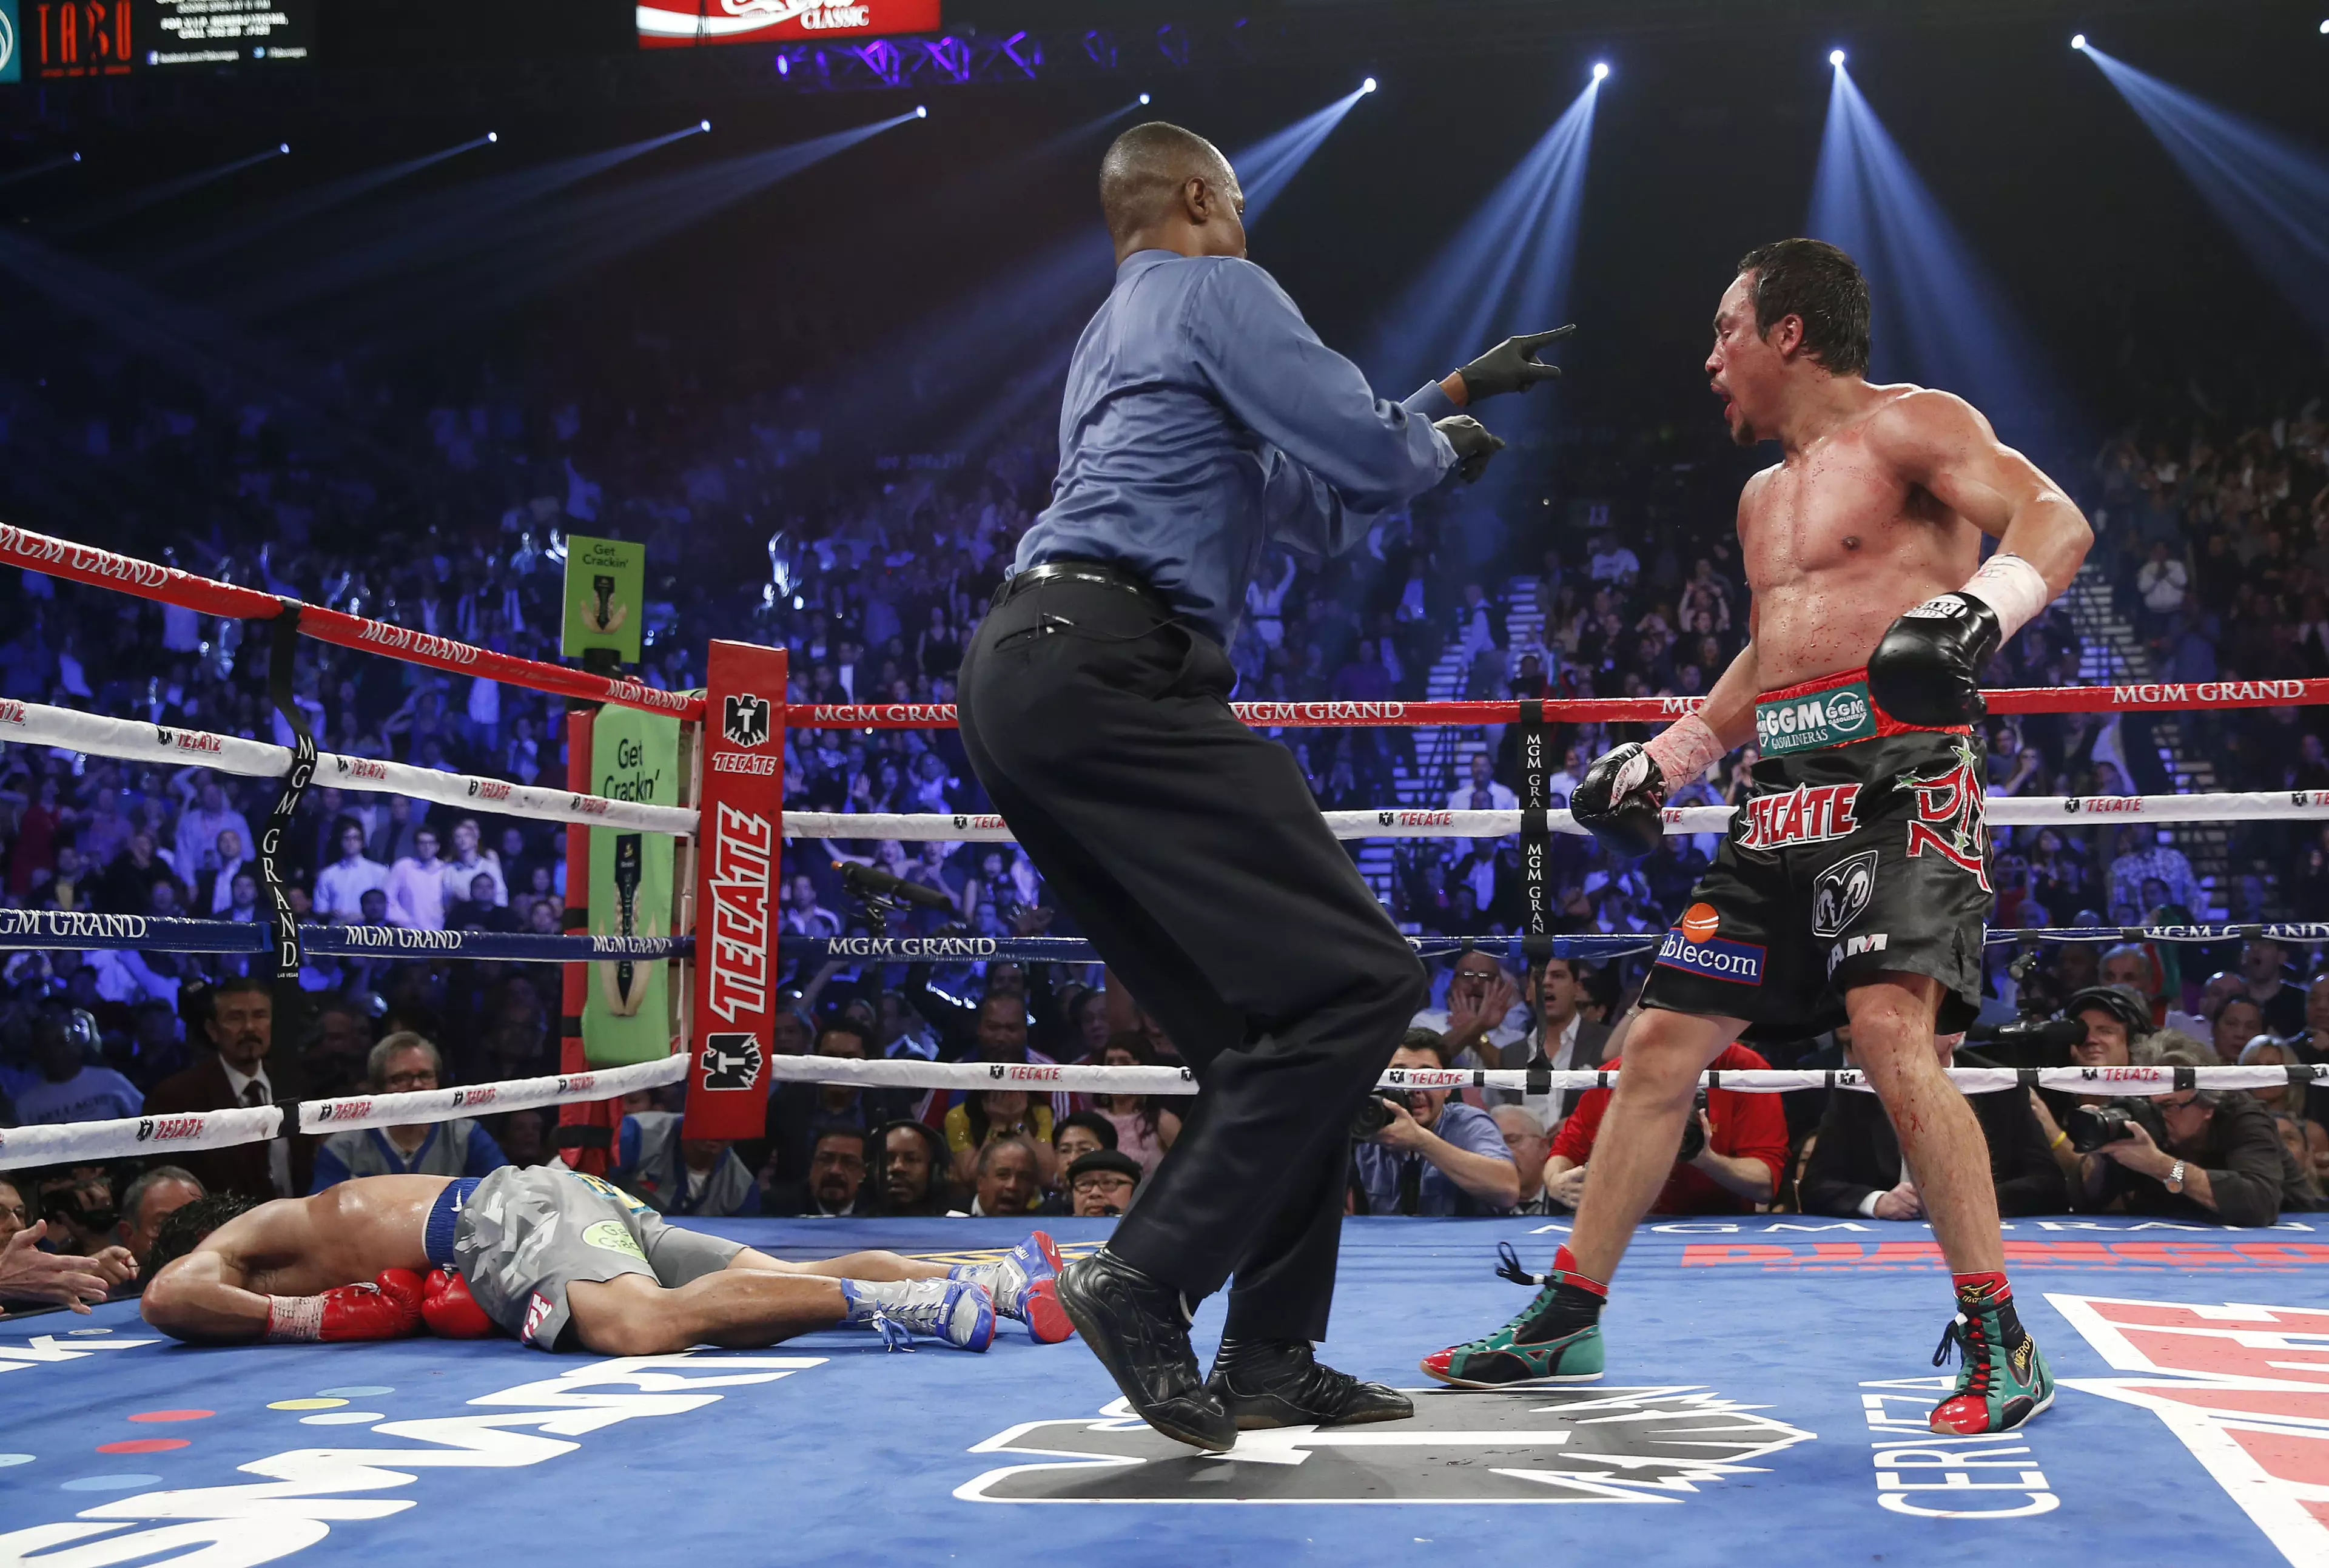 KO Of The Day: Marquez Stops Manny Pacquiao In Devastating Fashion